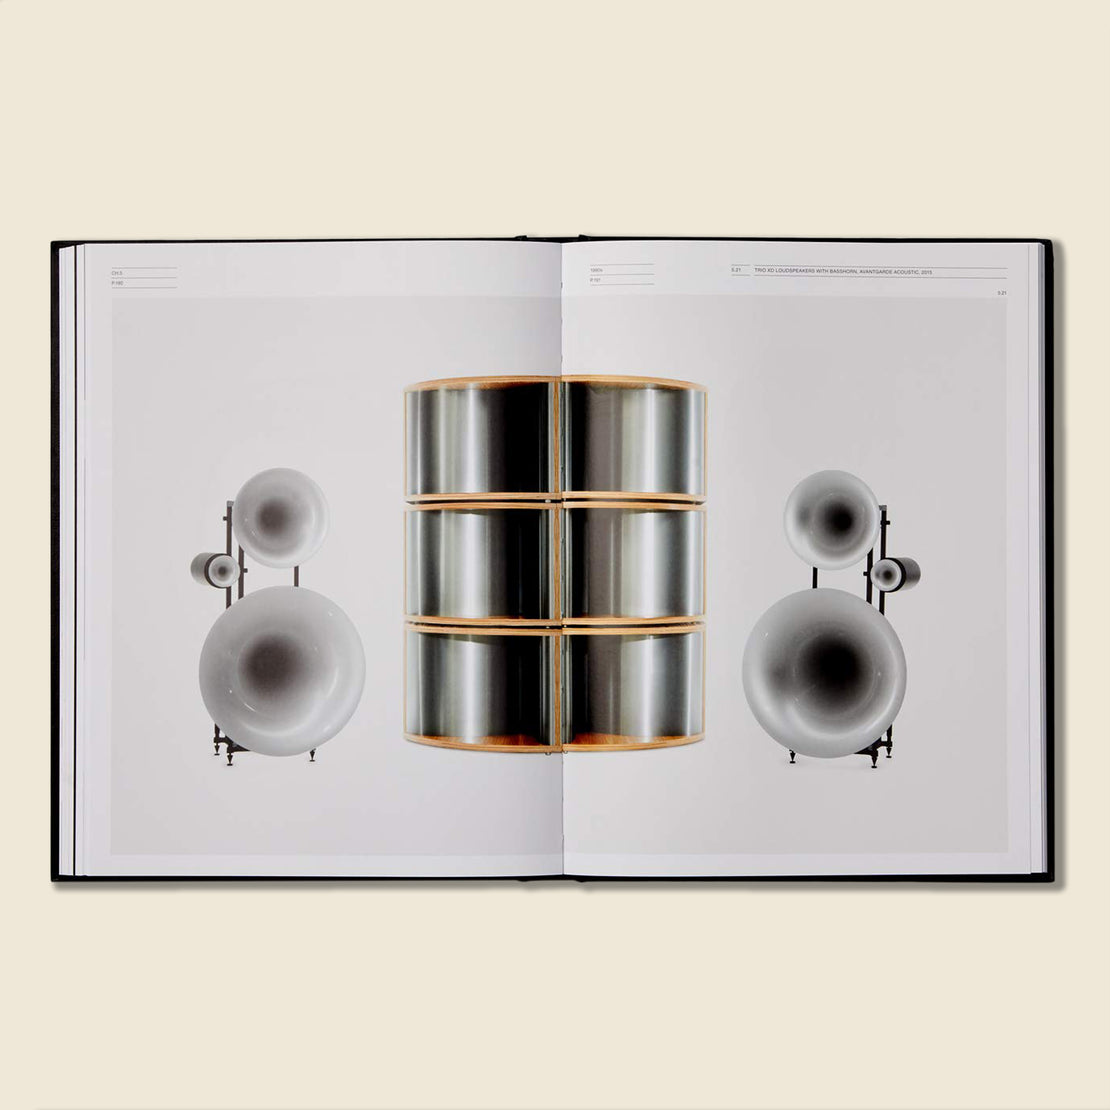 Hi-Fi: The History of High-End Audio Design - Gideon Schwartz - Bookstore - STAG Provisions - Gift - Books